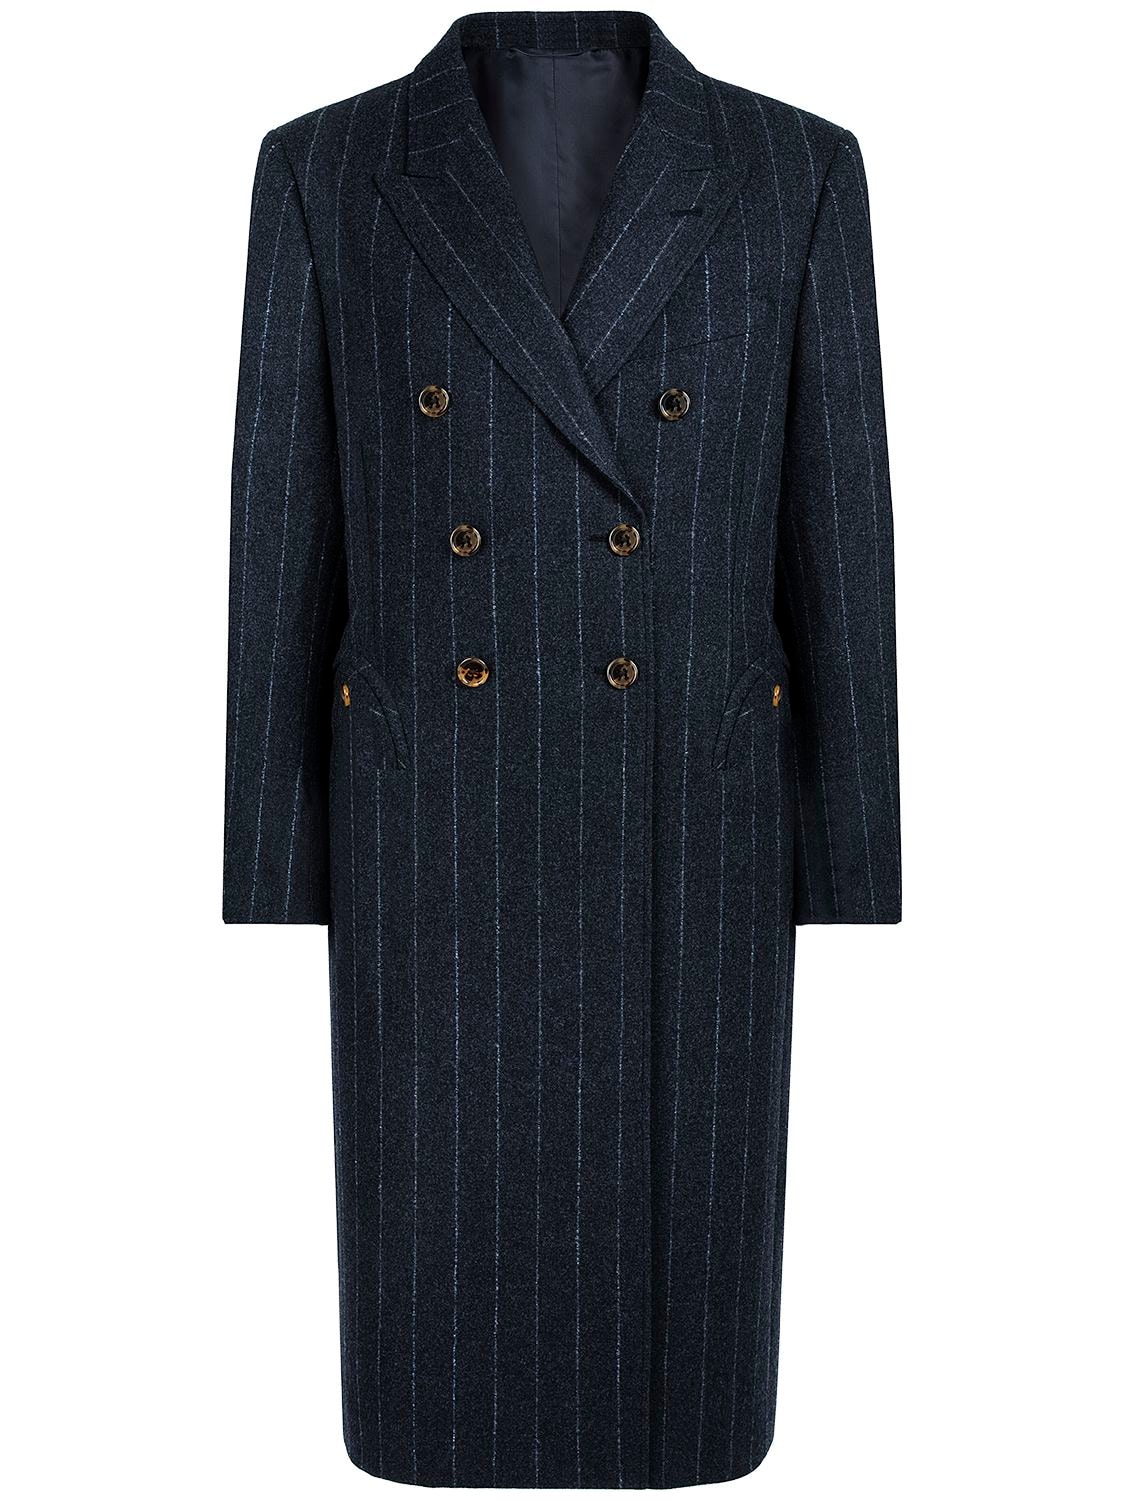 Image of Ferien Pinstriped Wool & Cashmere Coat